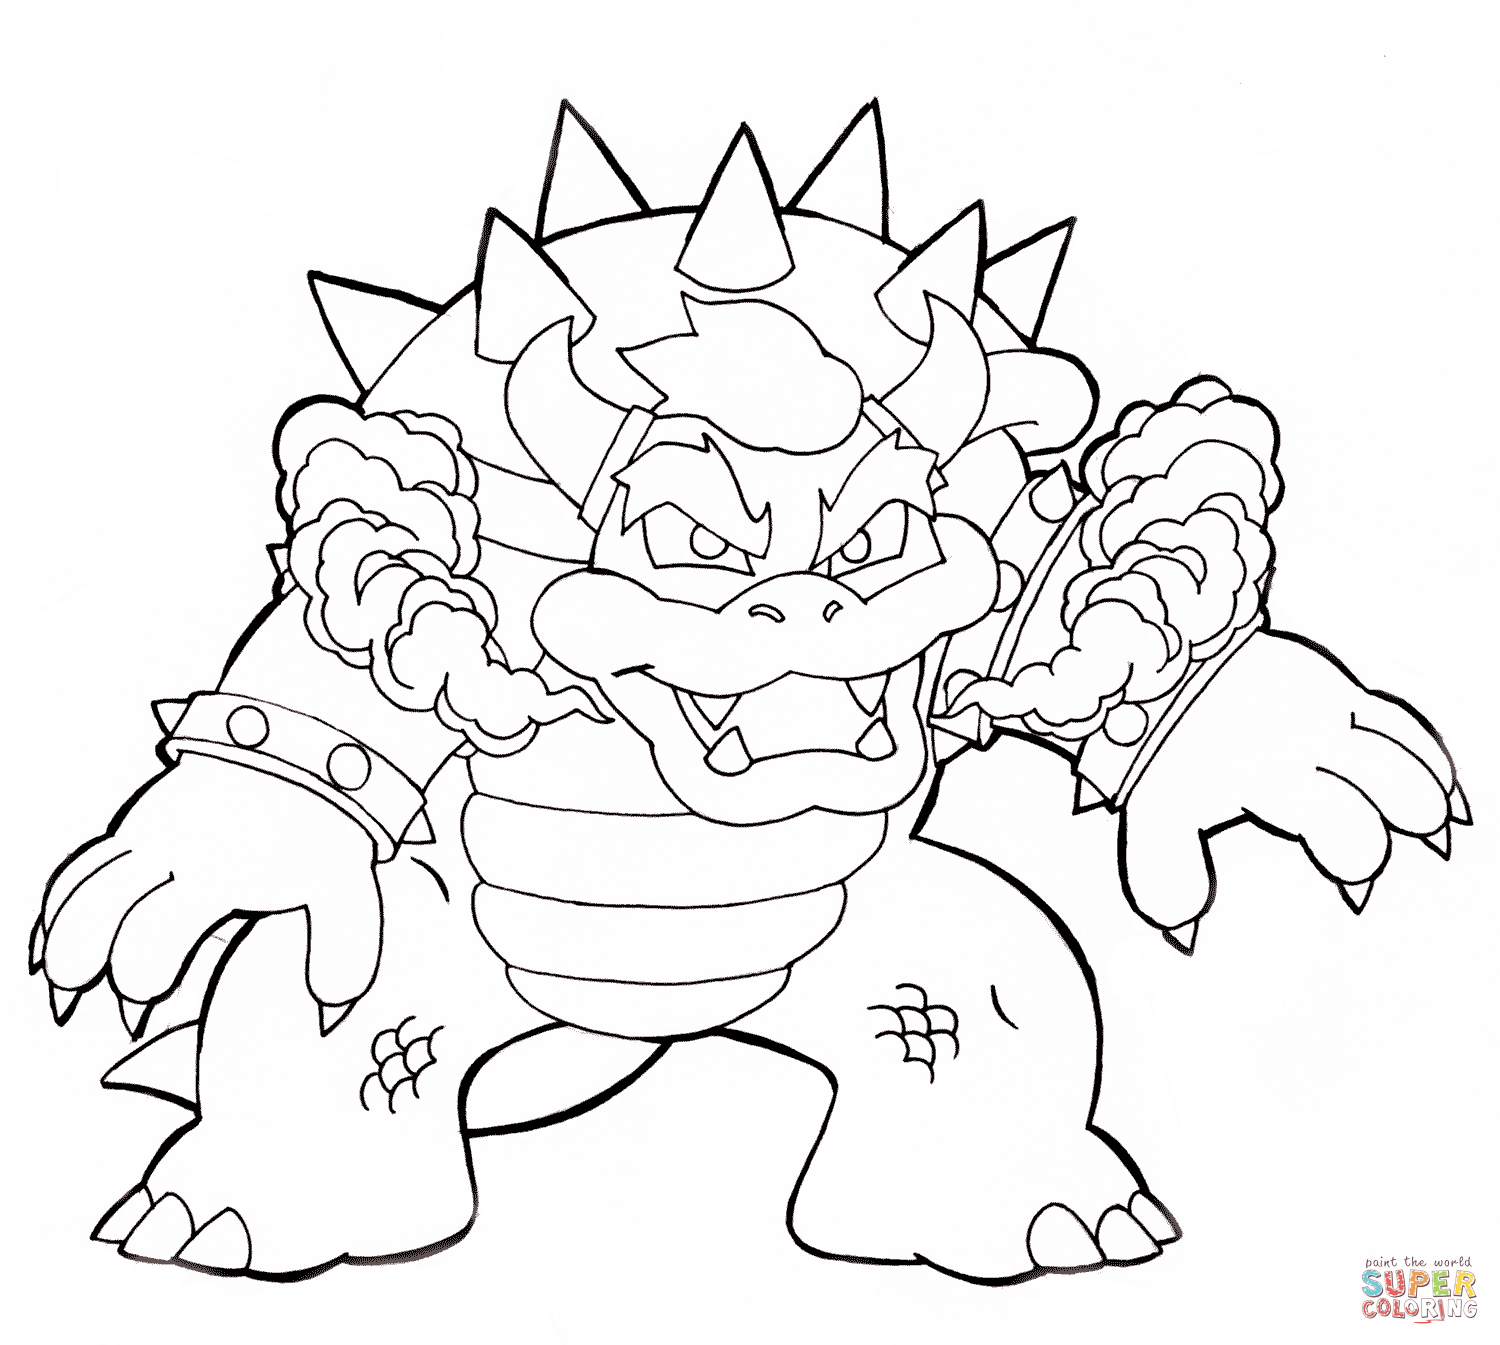 Bowser Jr To Print - Coloring Pages for Kids and for Adults